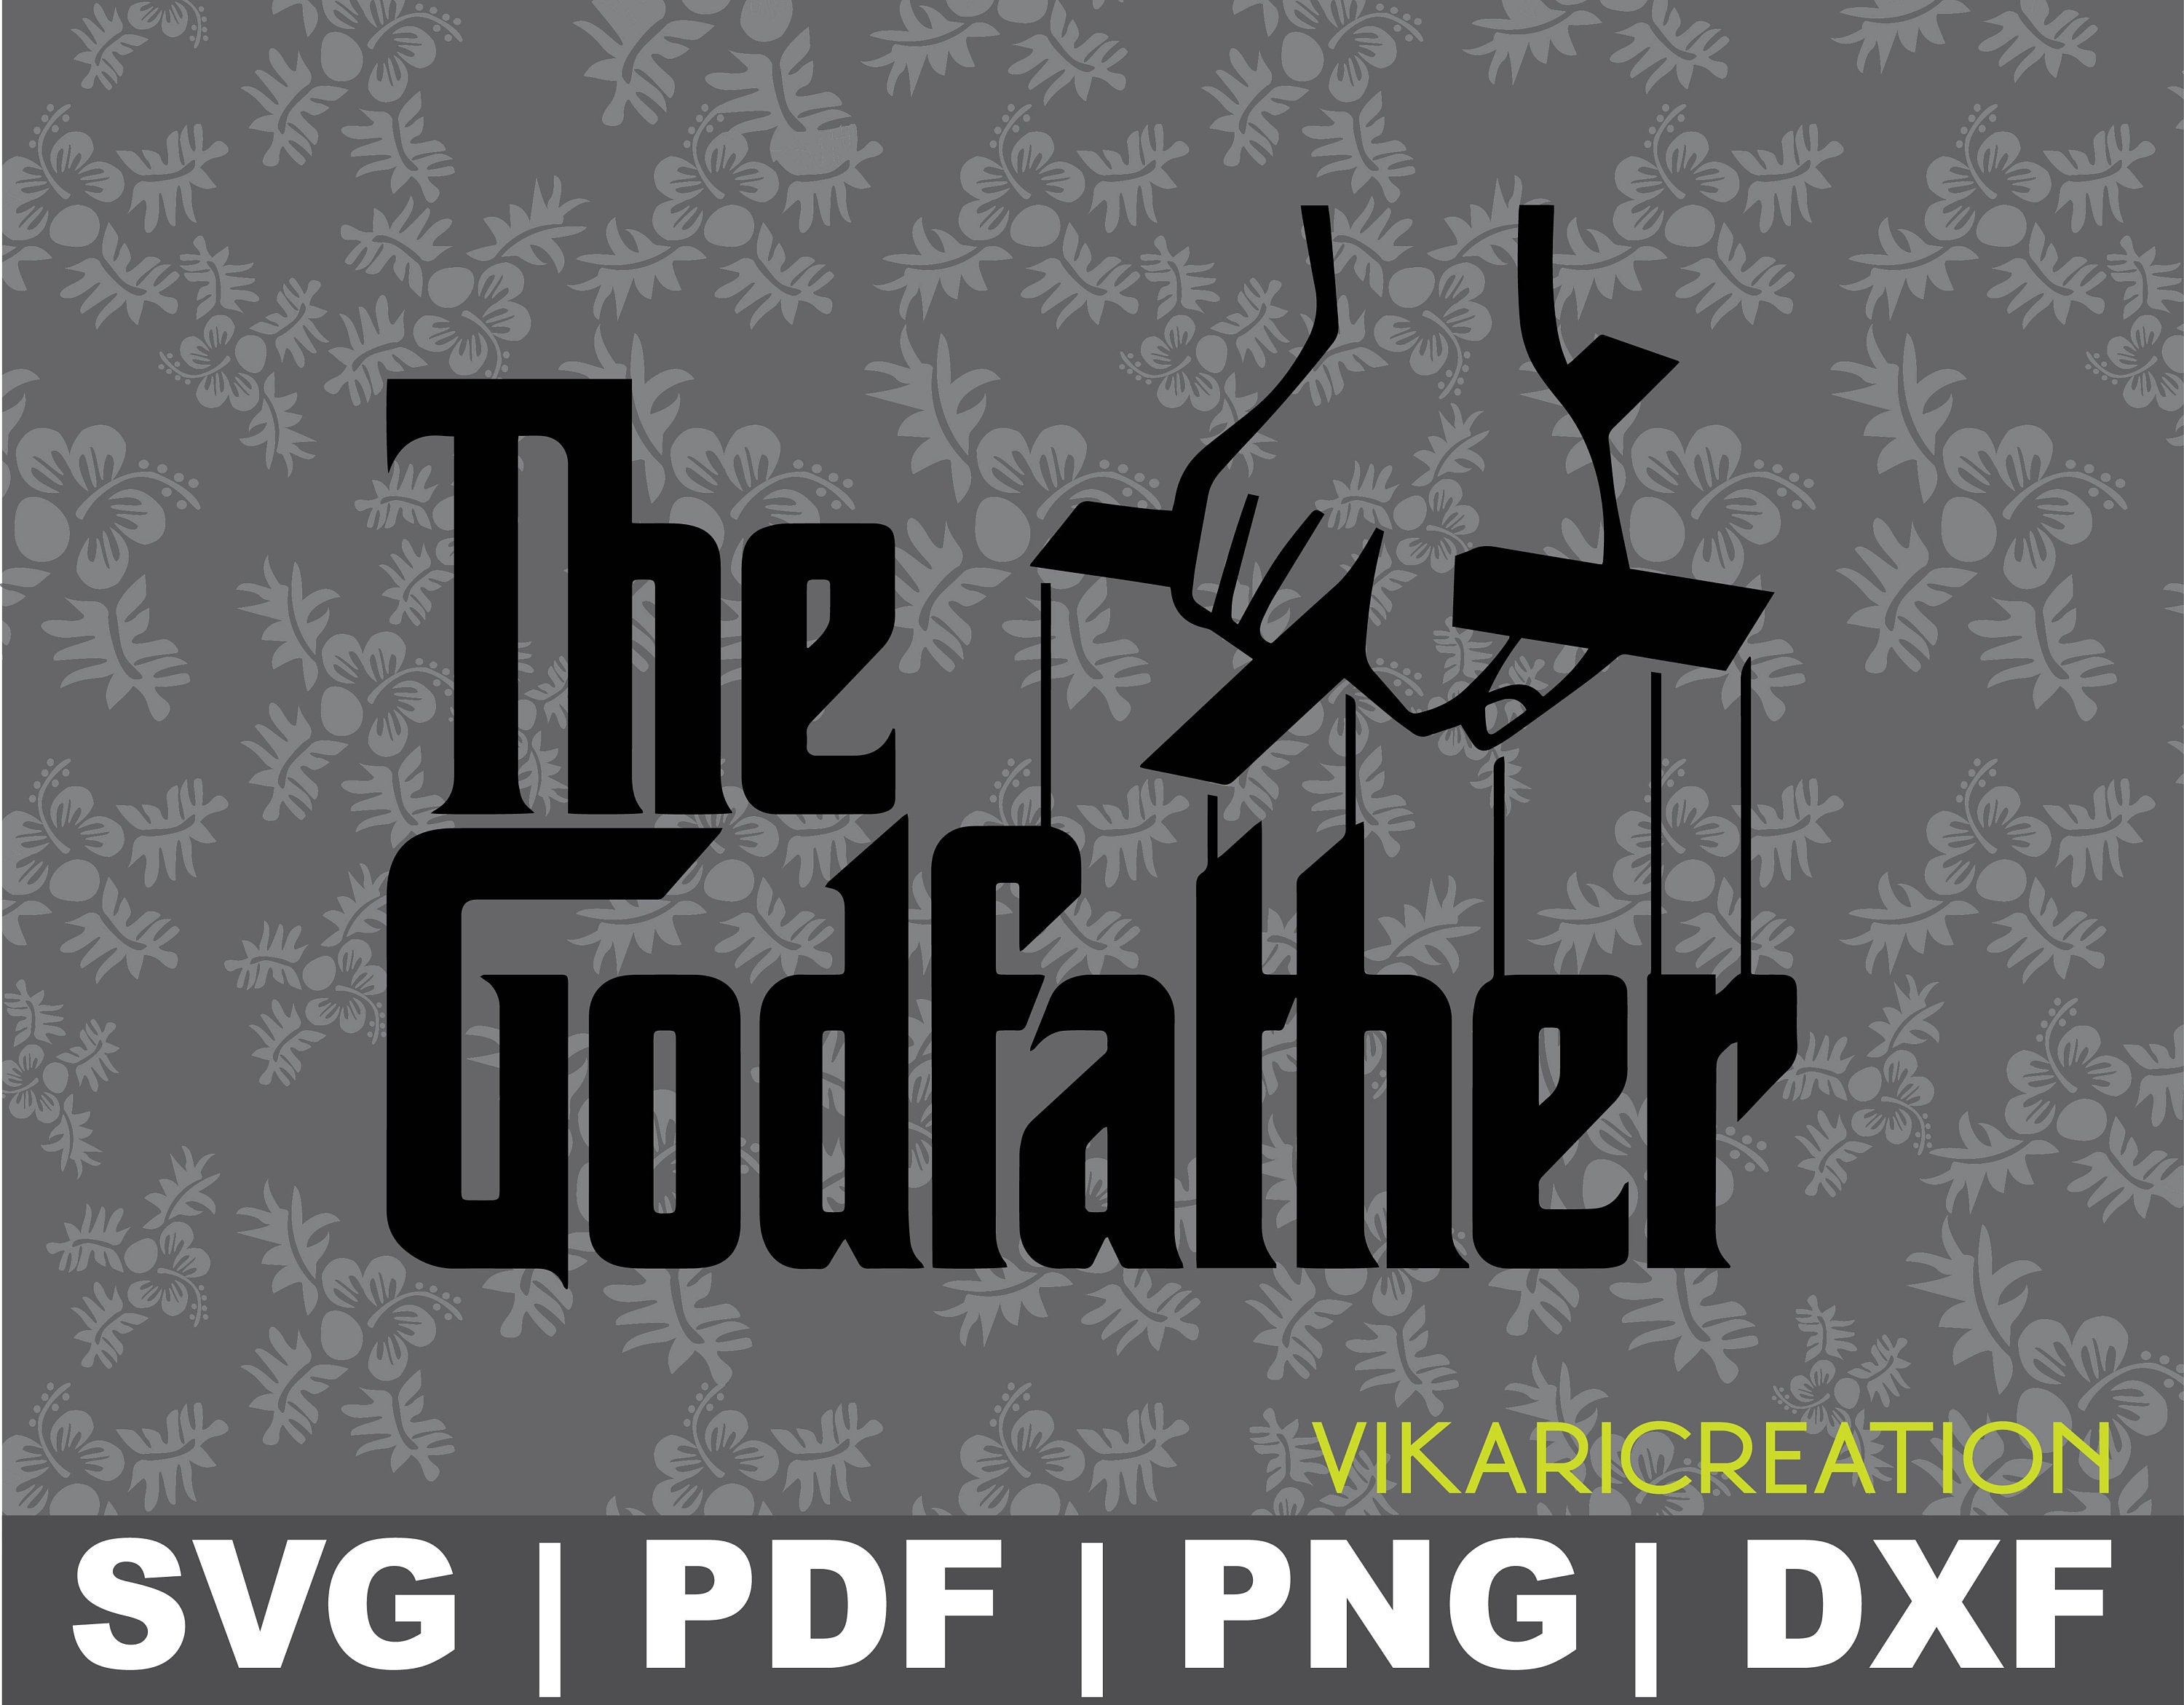 Download The Godfather SVG The Godfather Logo The Godfather | Etsy